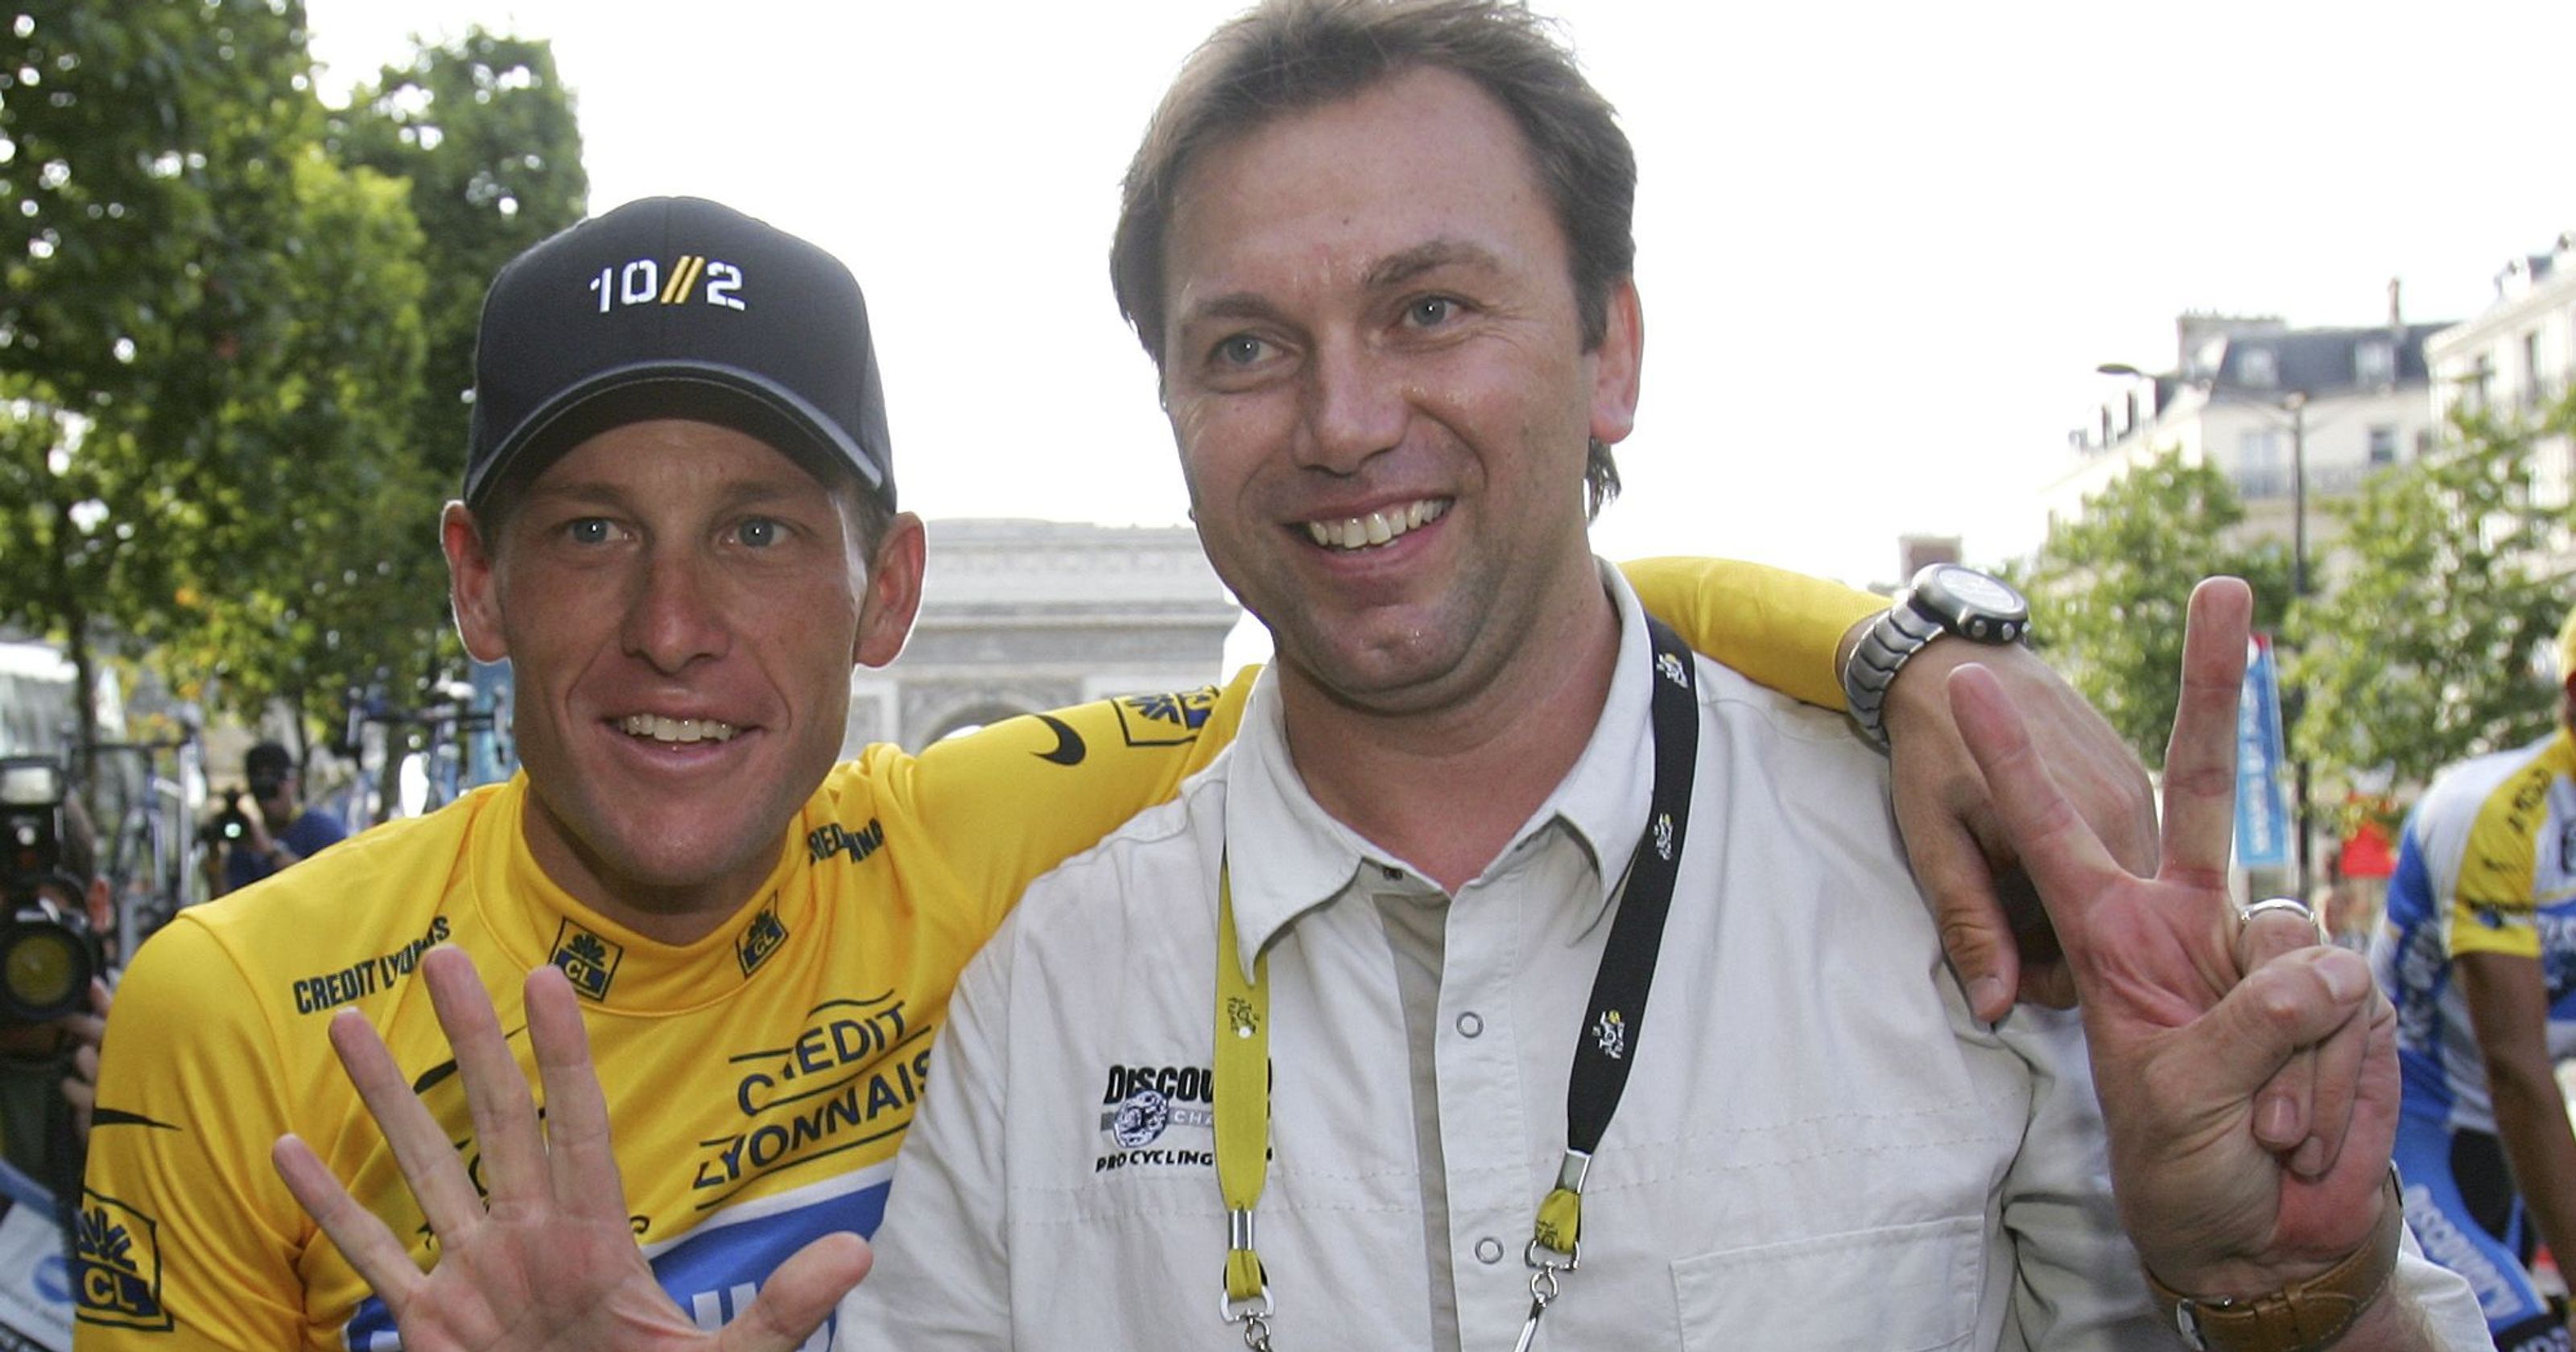 Armstrong’s Former Team Manager Banned from Cycling for Life